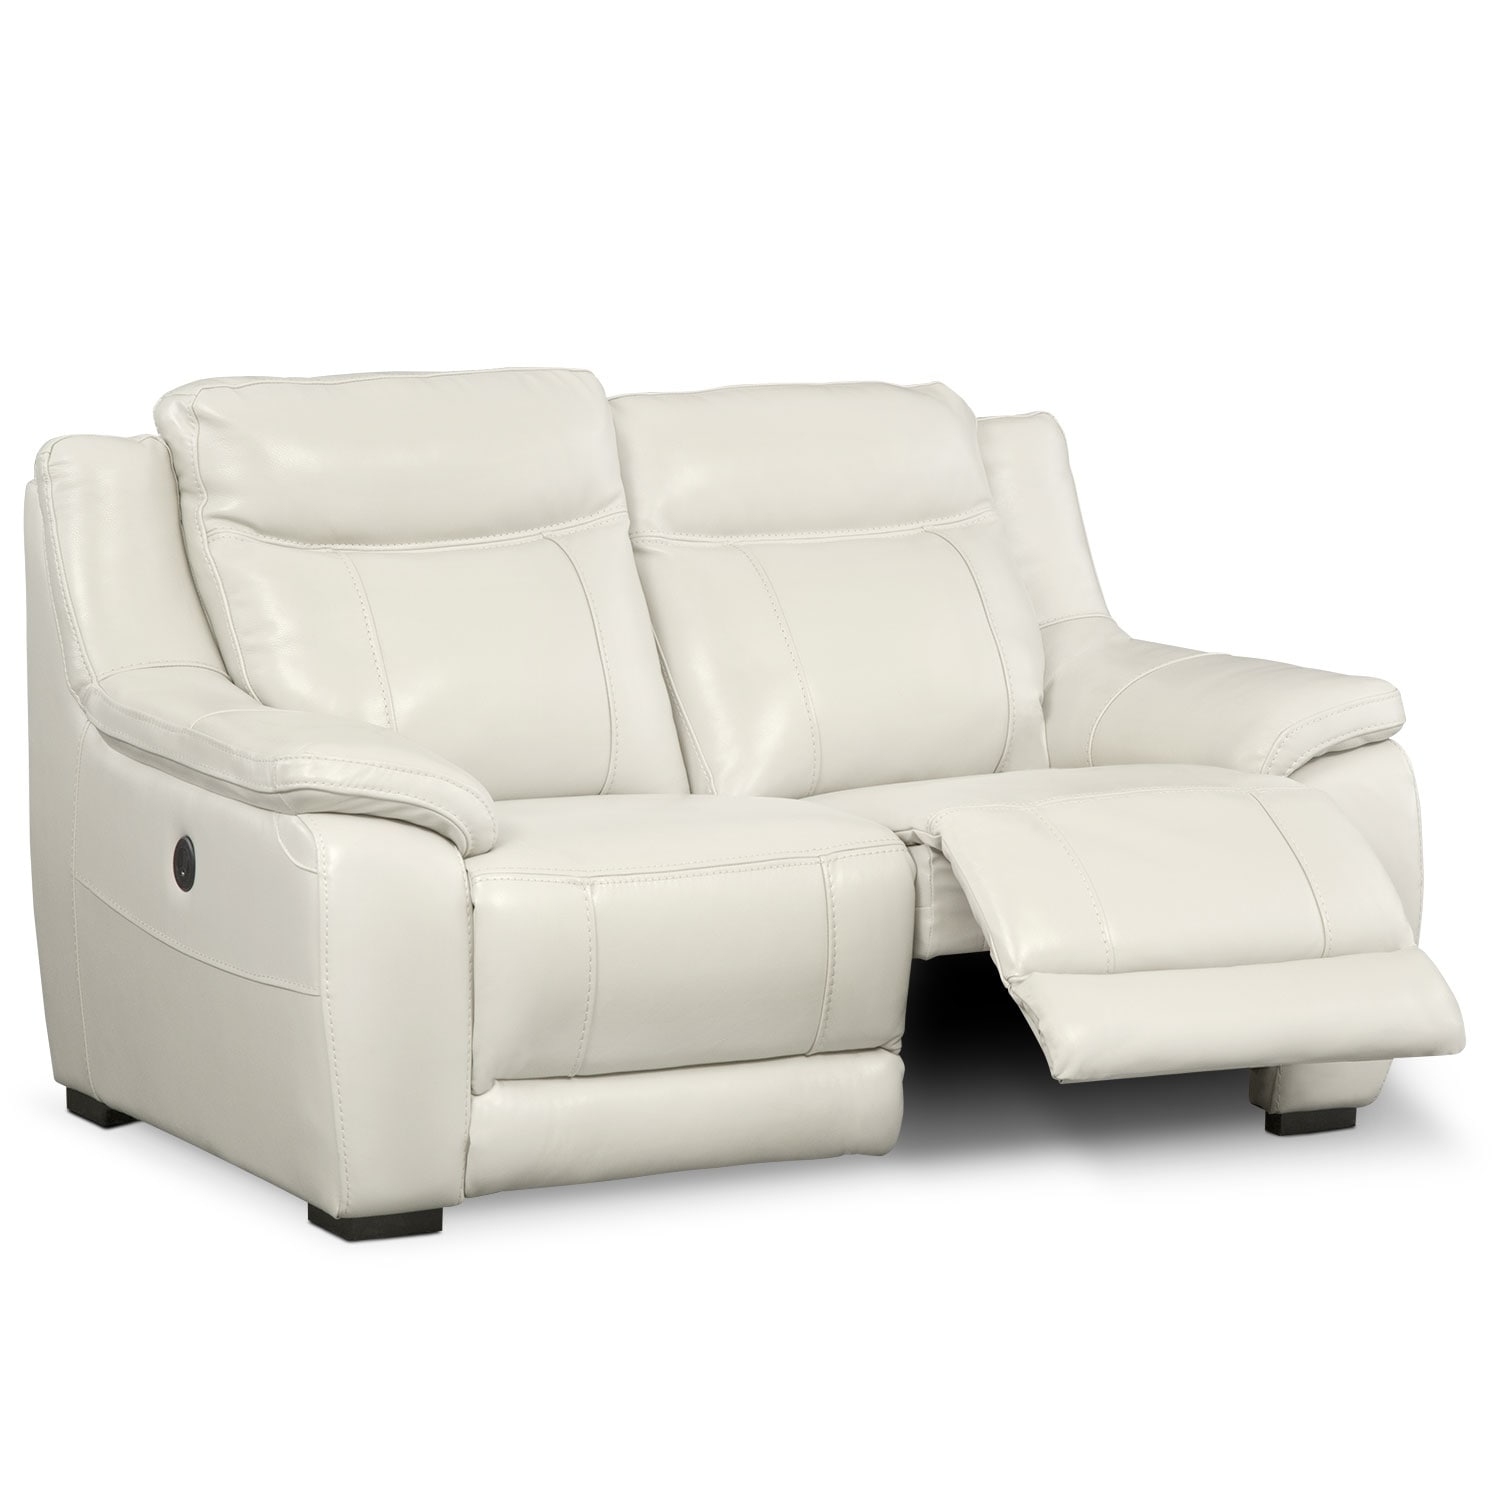 Lido Power Reclining Loveseat Ivory Value City Furniture